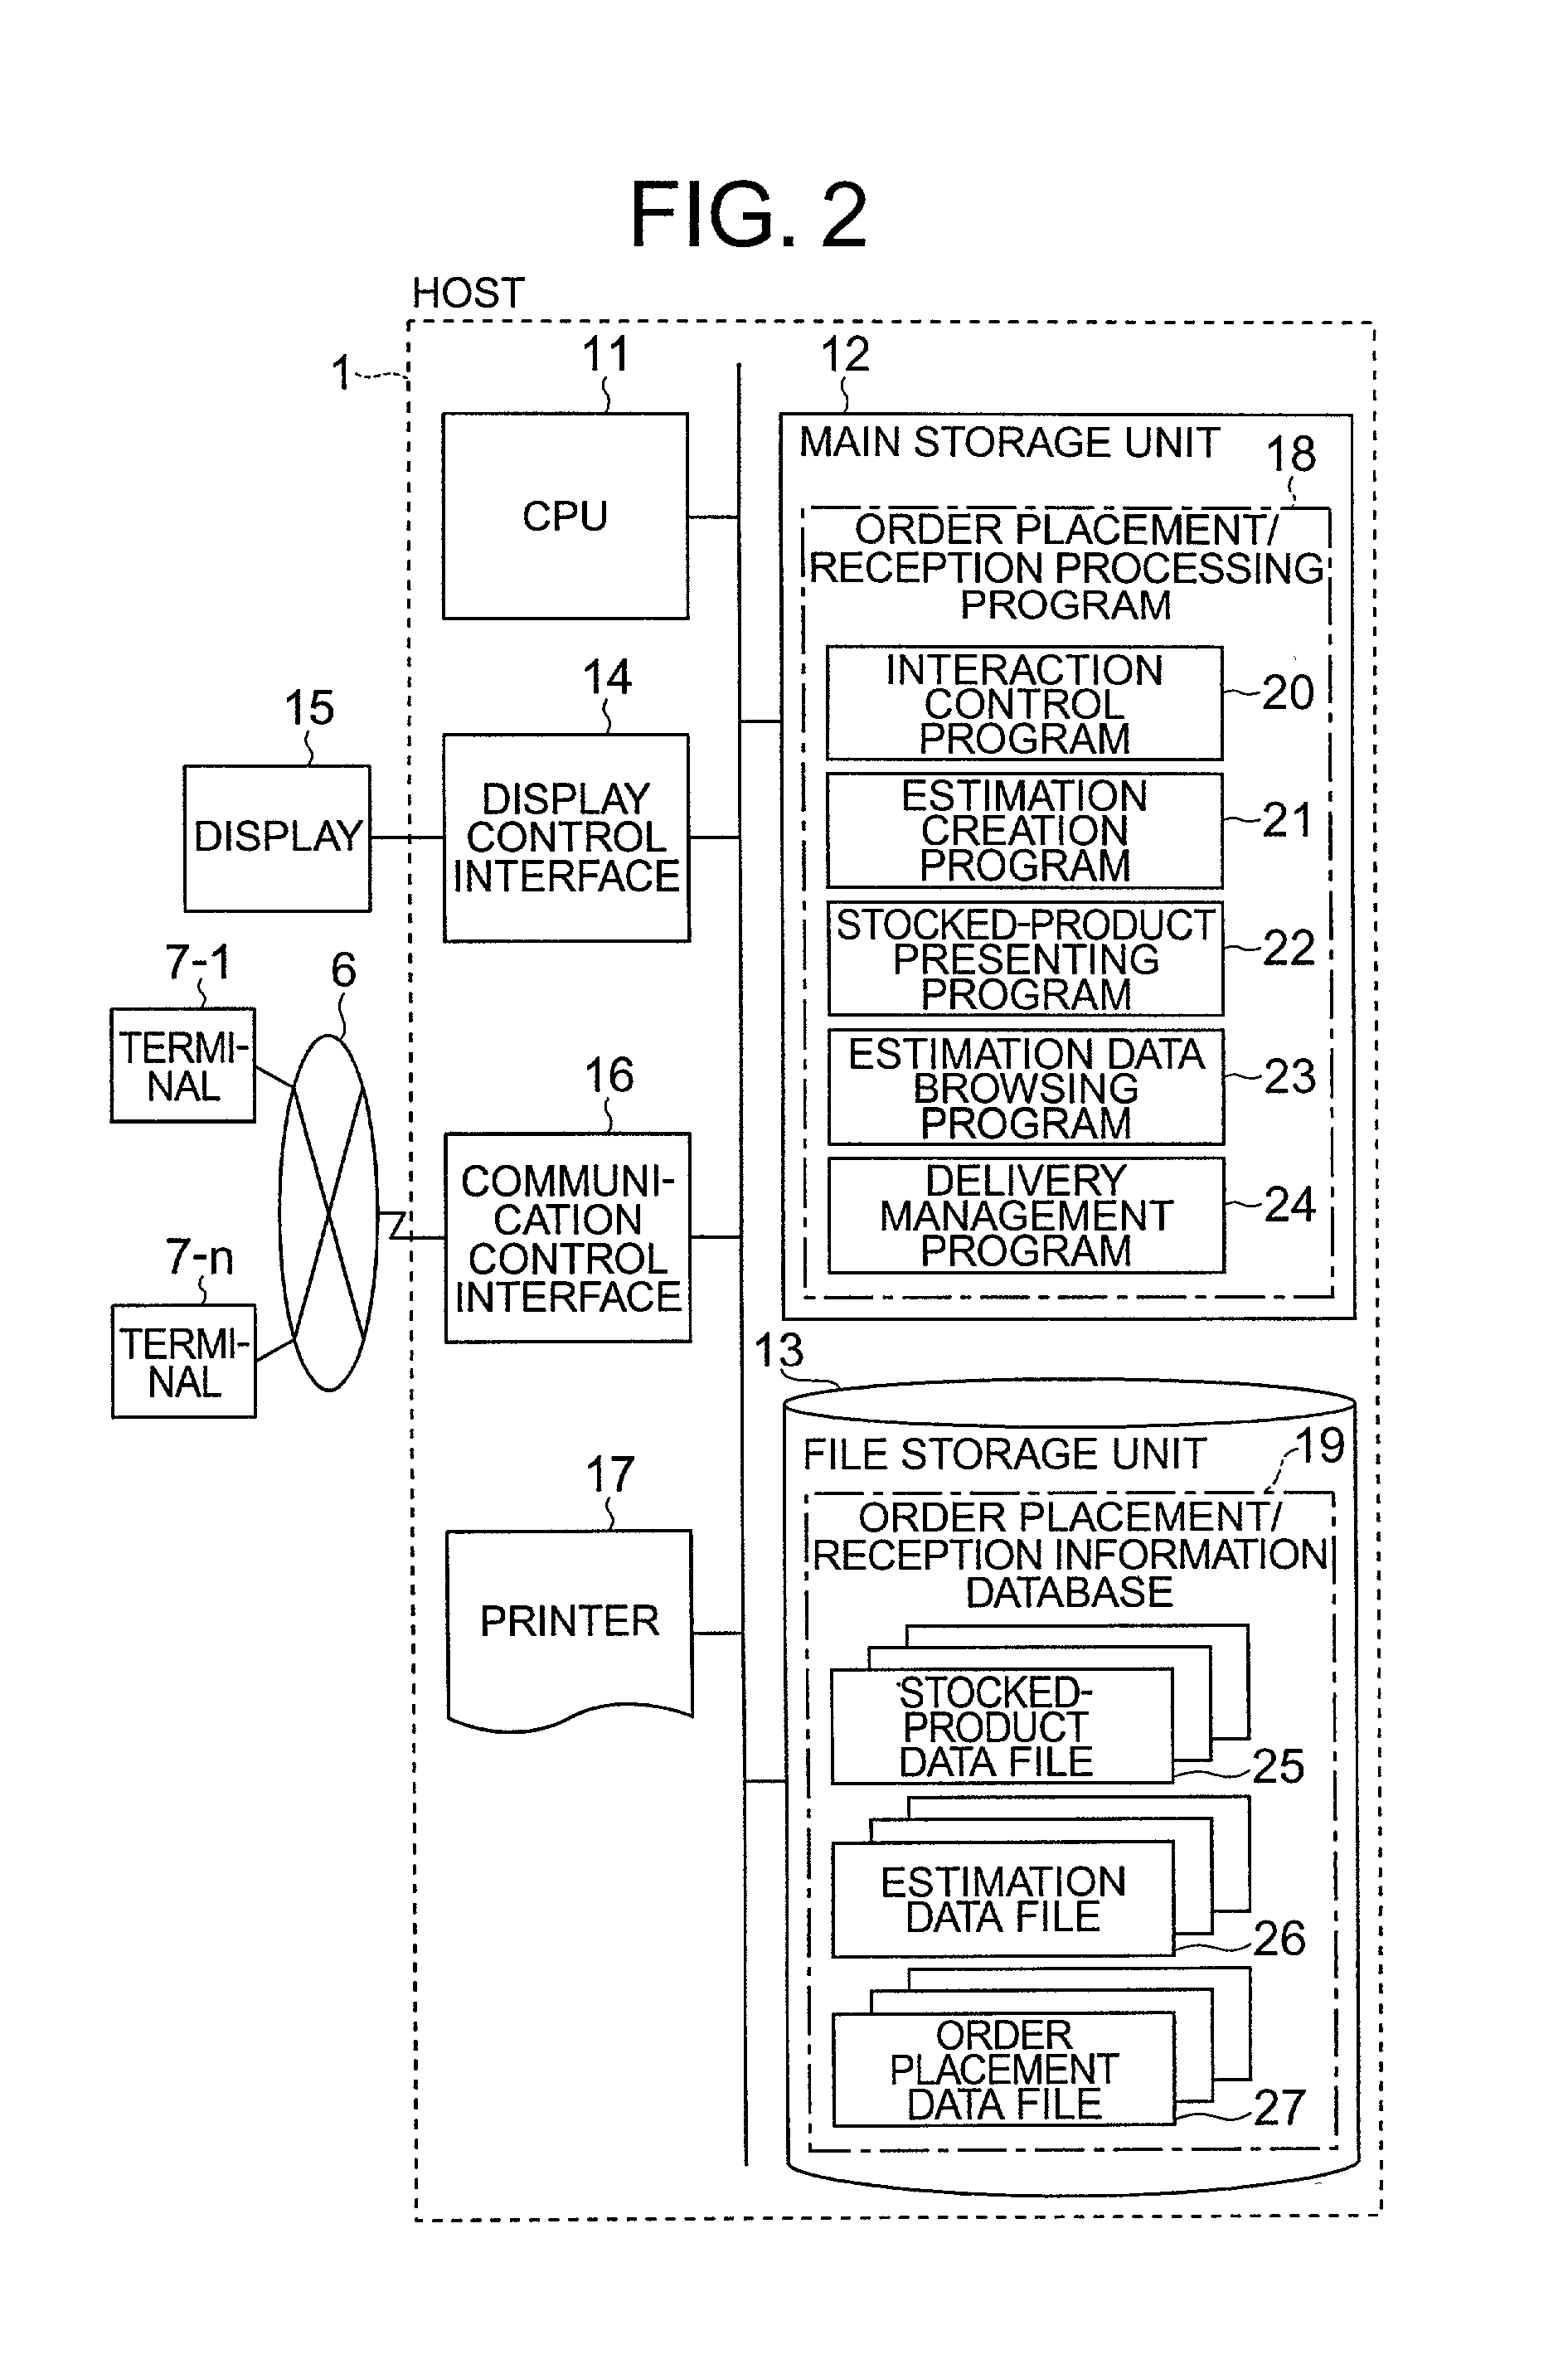 Online order-placement and reception processing method and system